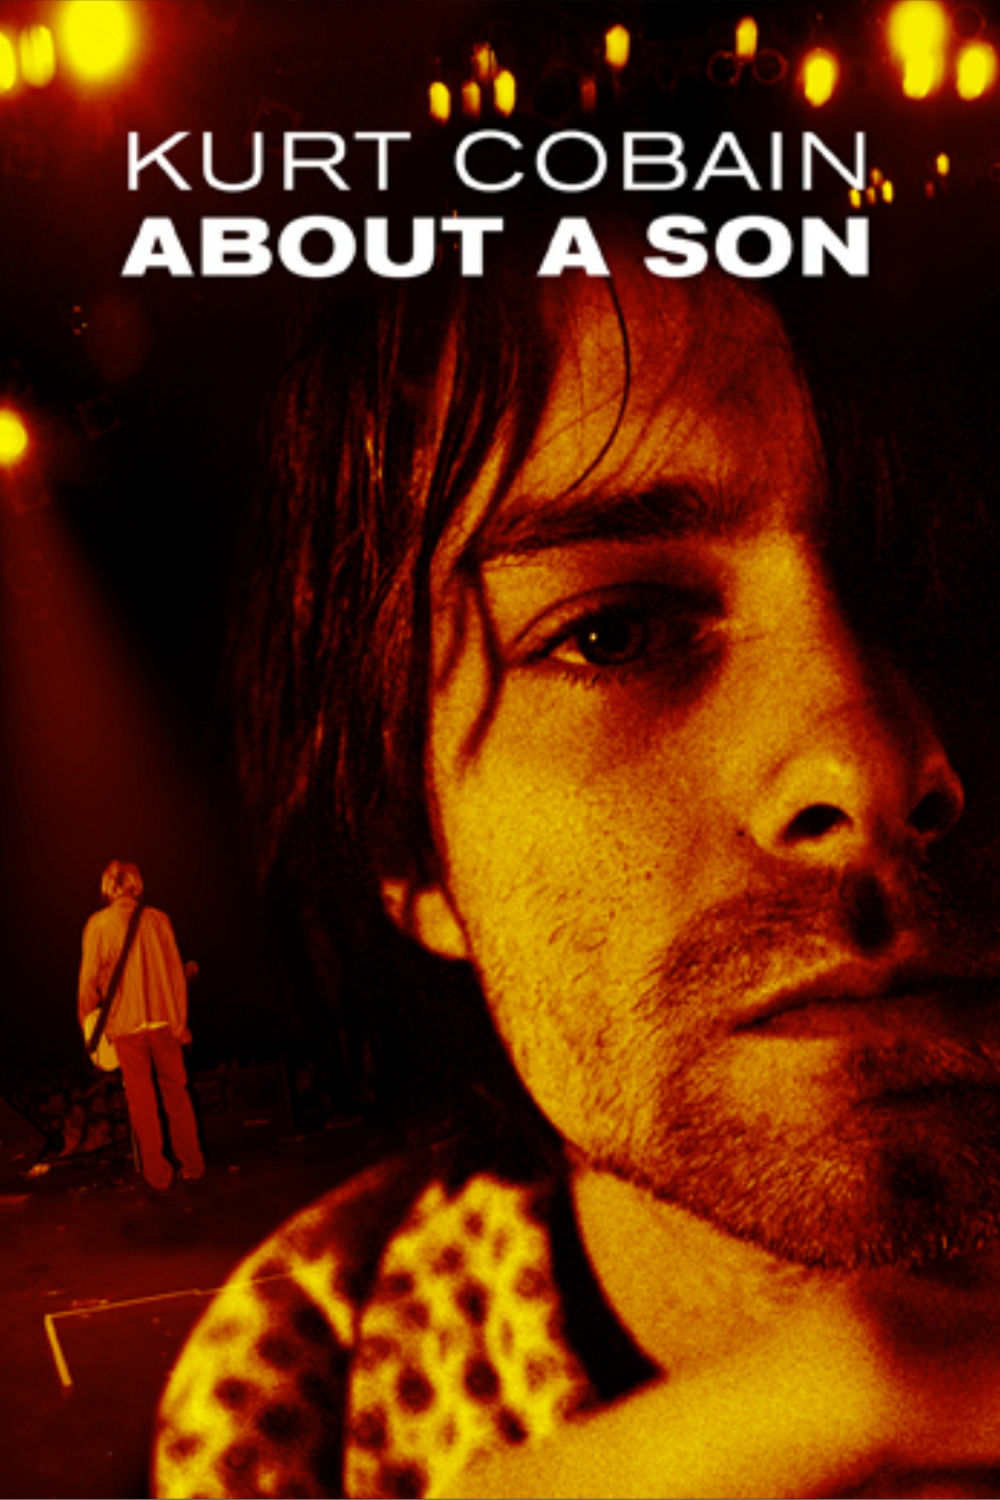 About a Son “